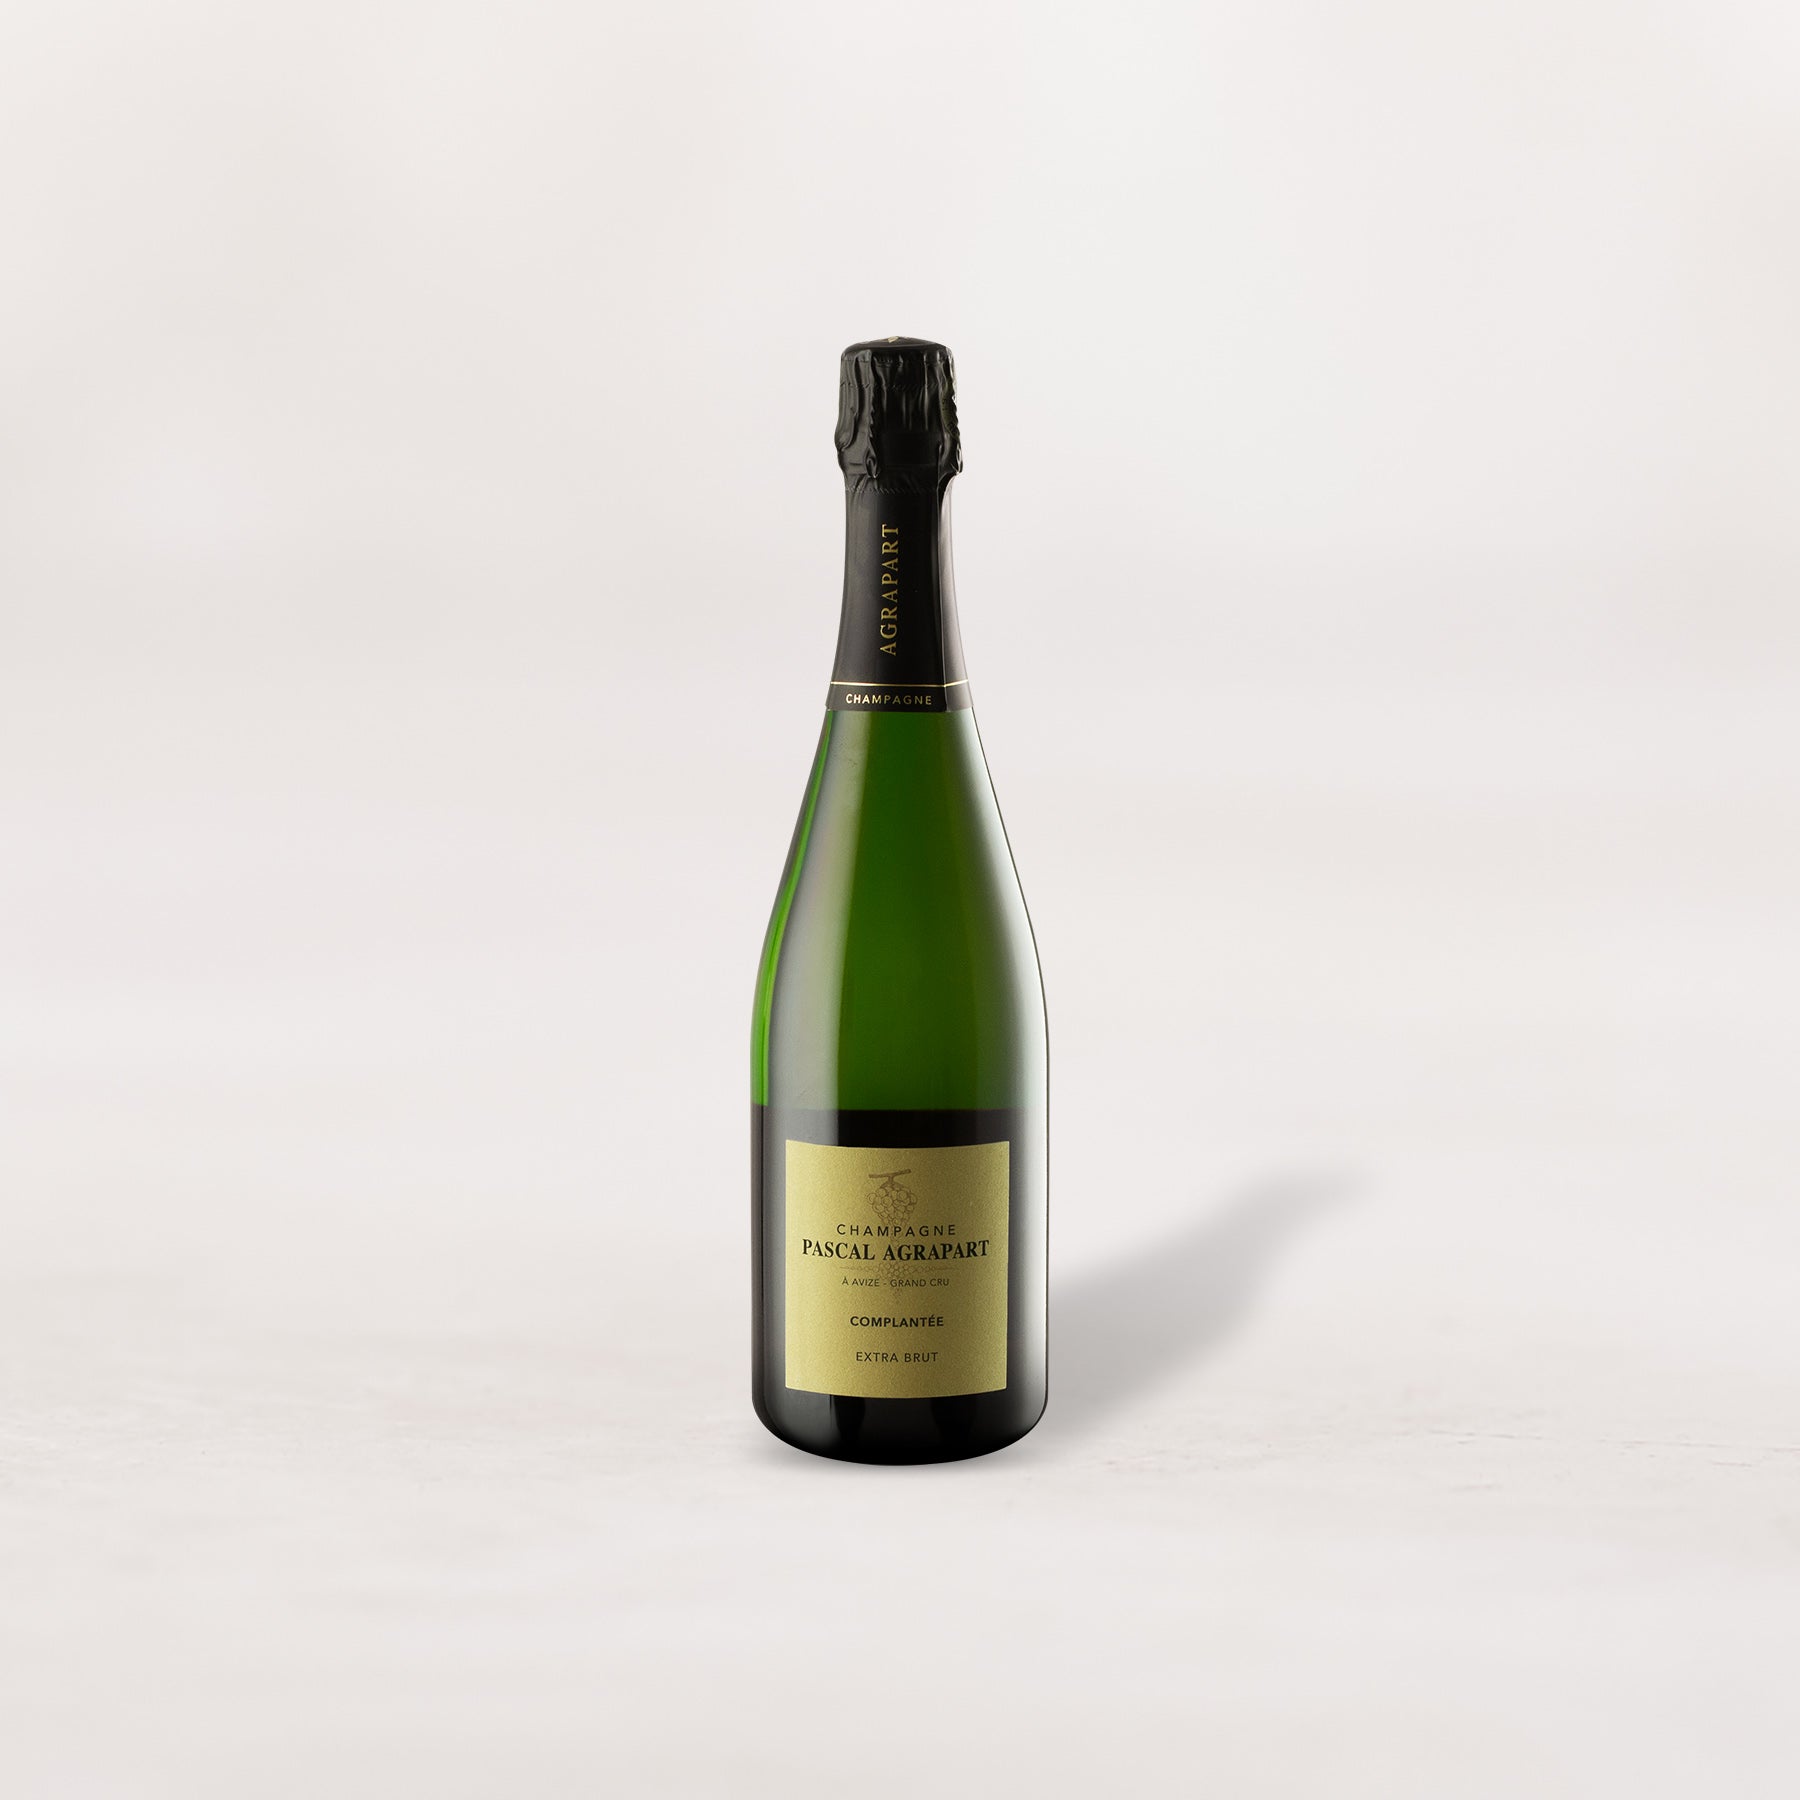 Champagne Pascal Agrapart, "Complantée" Grand Cru Extra Brut